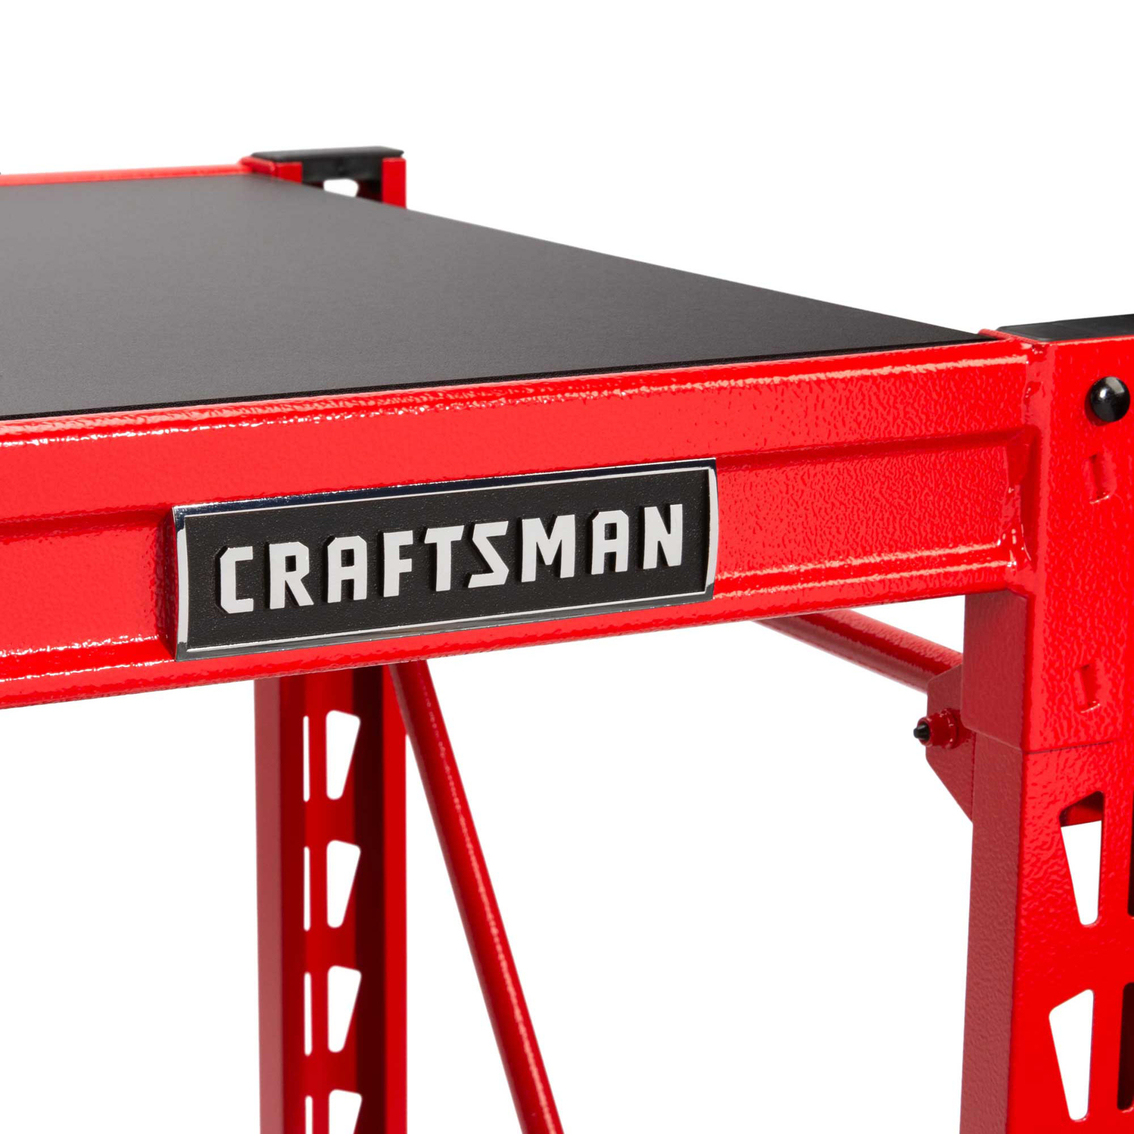 Craftsman 2-Shelf 3 ft. Tall Stackable Tool Chest Depth Storage Rack - Image 6 of 10